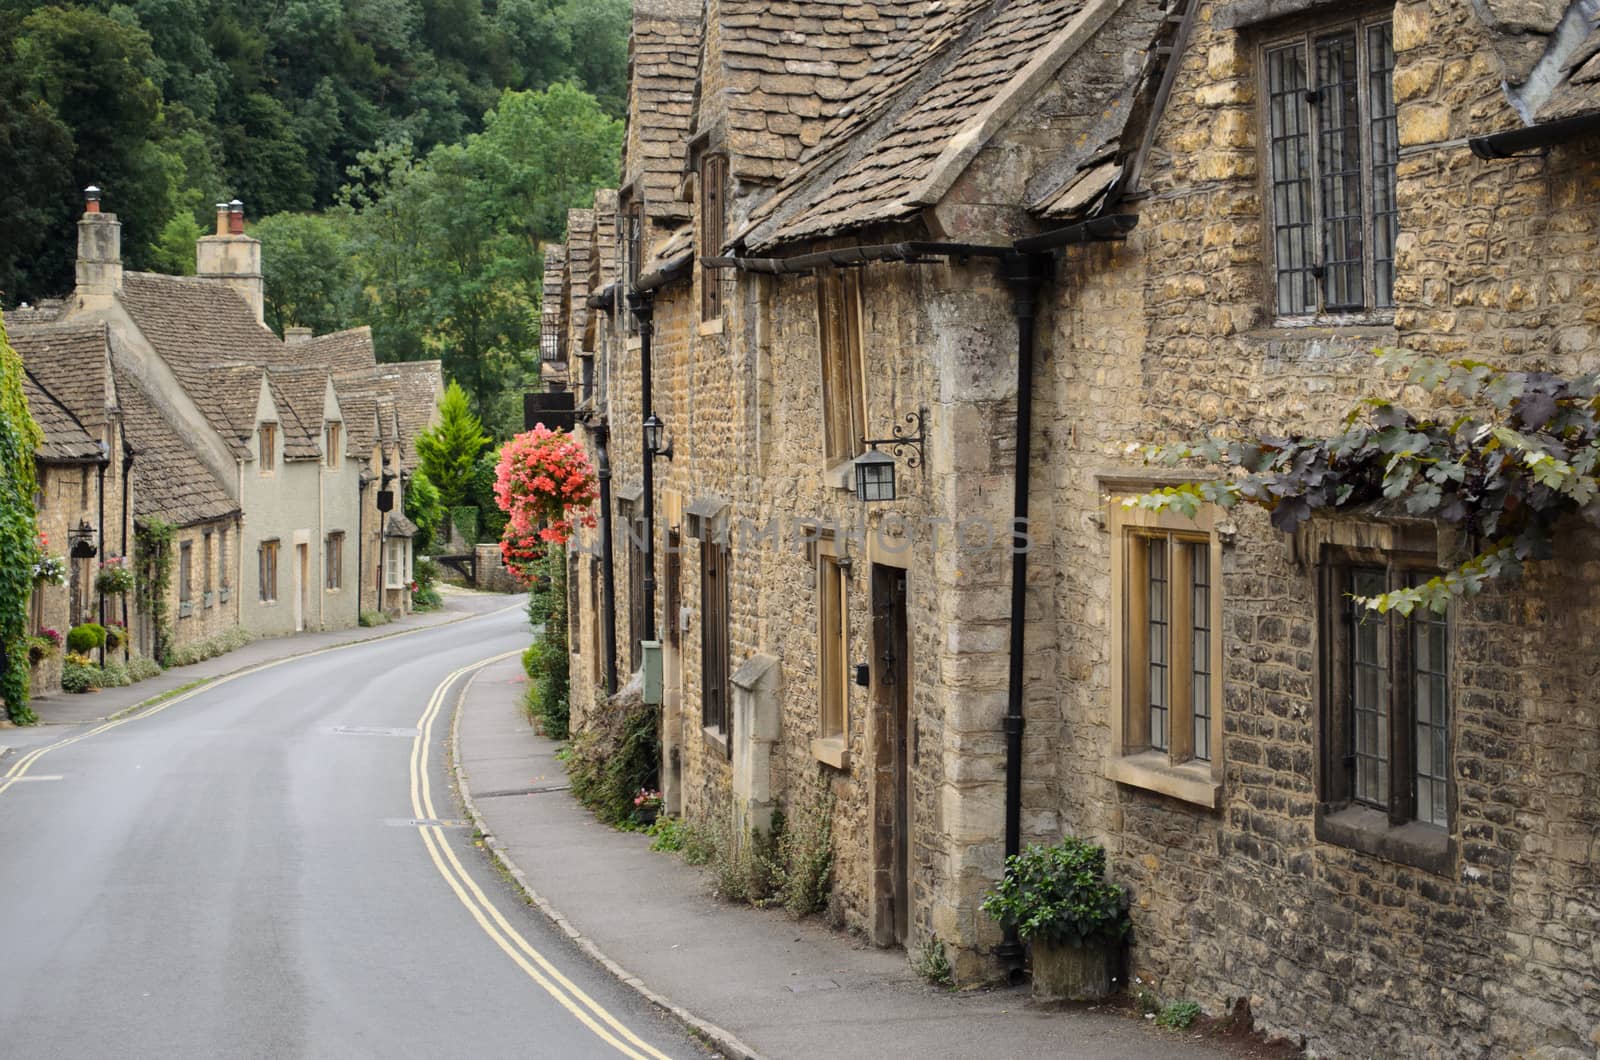 The quaint fairy tale village of Castle Combe at the border between the Cotswolds and Wiltshire with its characteristic old cottages. Rural England at its best.